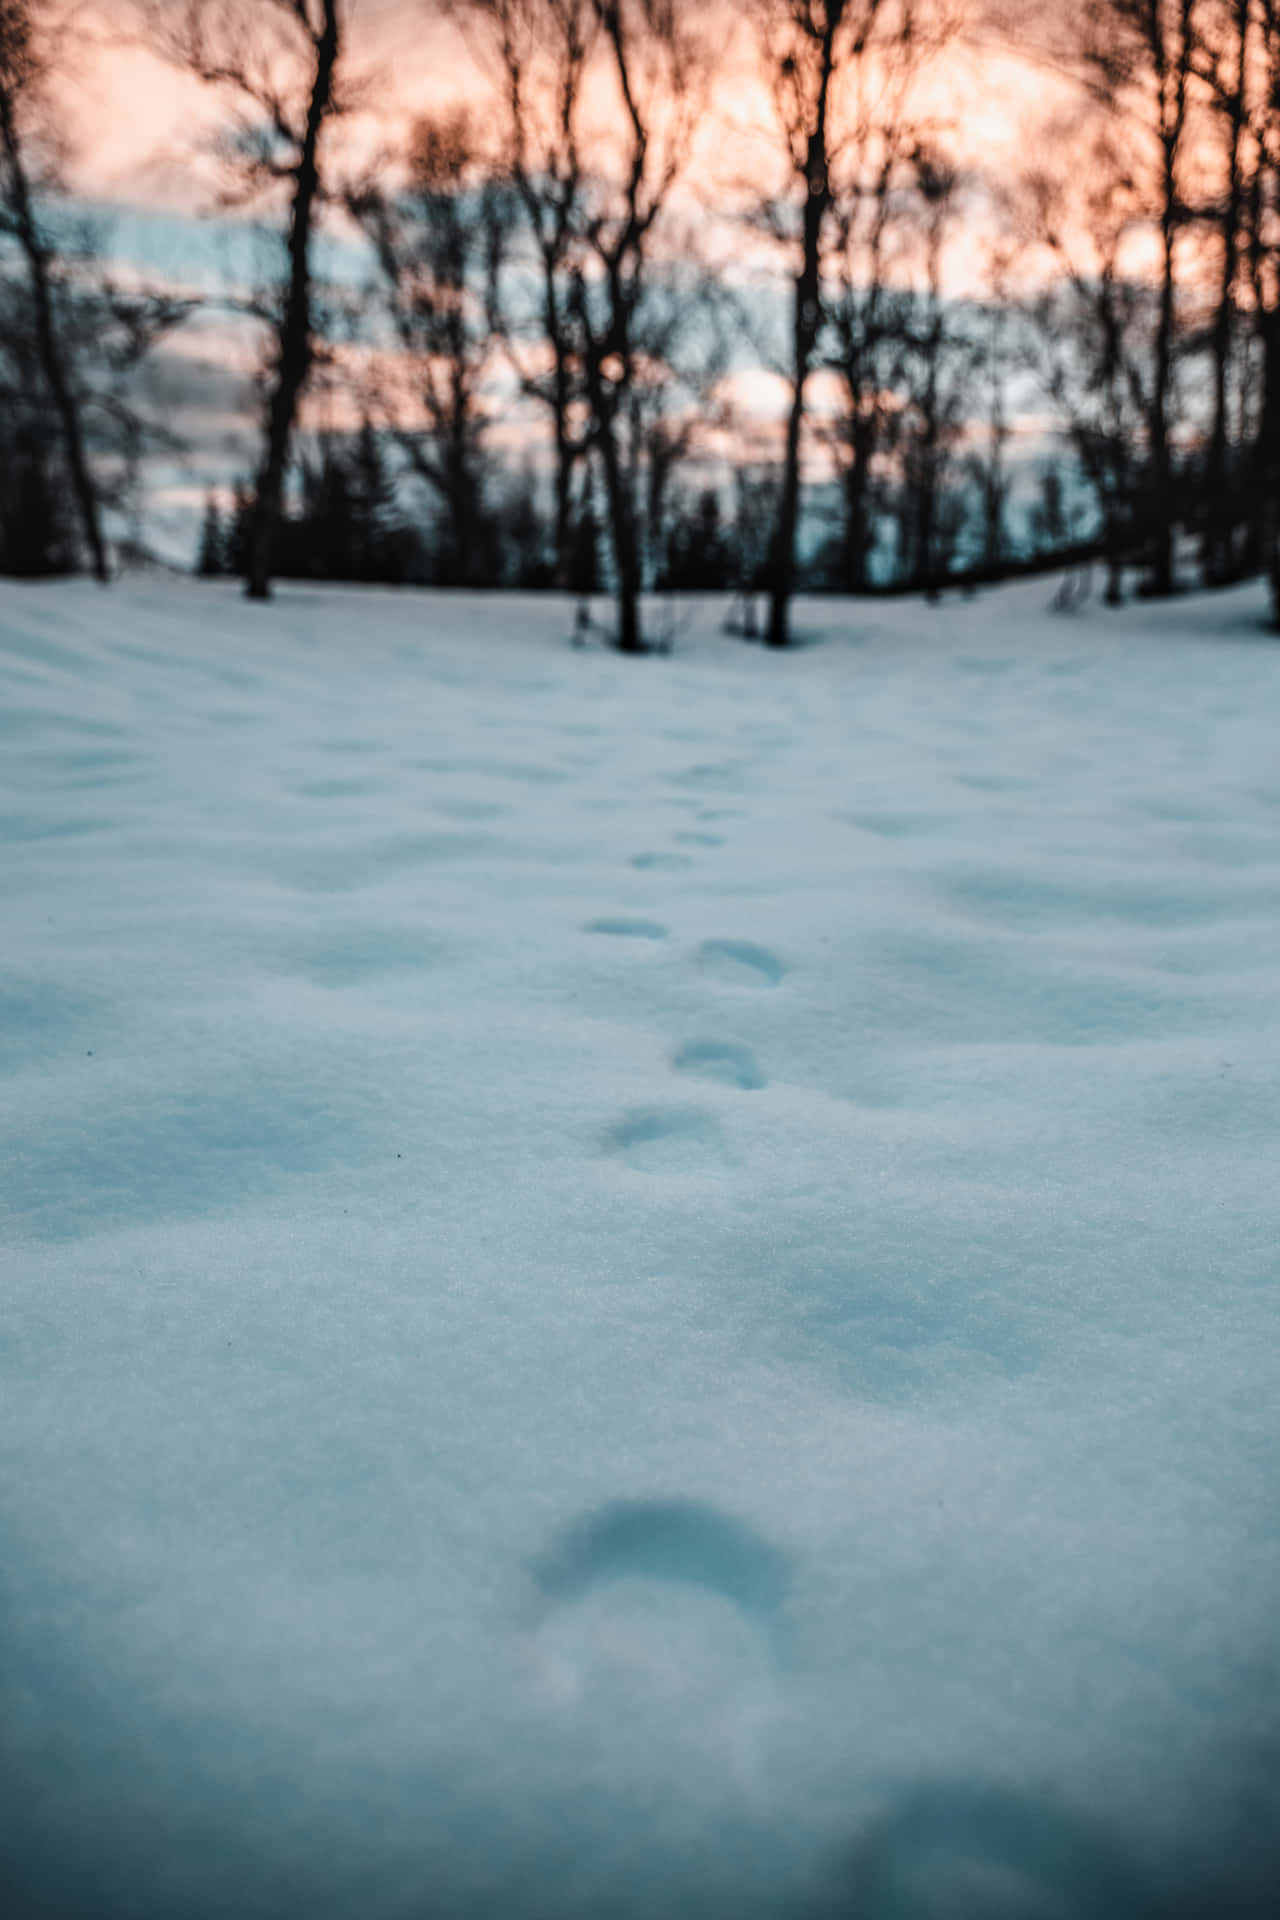 a snow covered field with trees and footprints